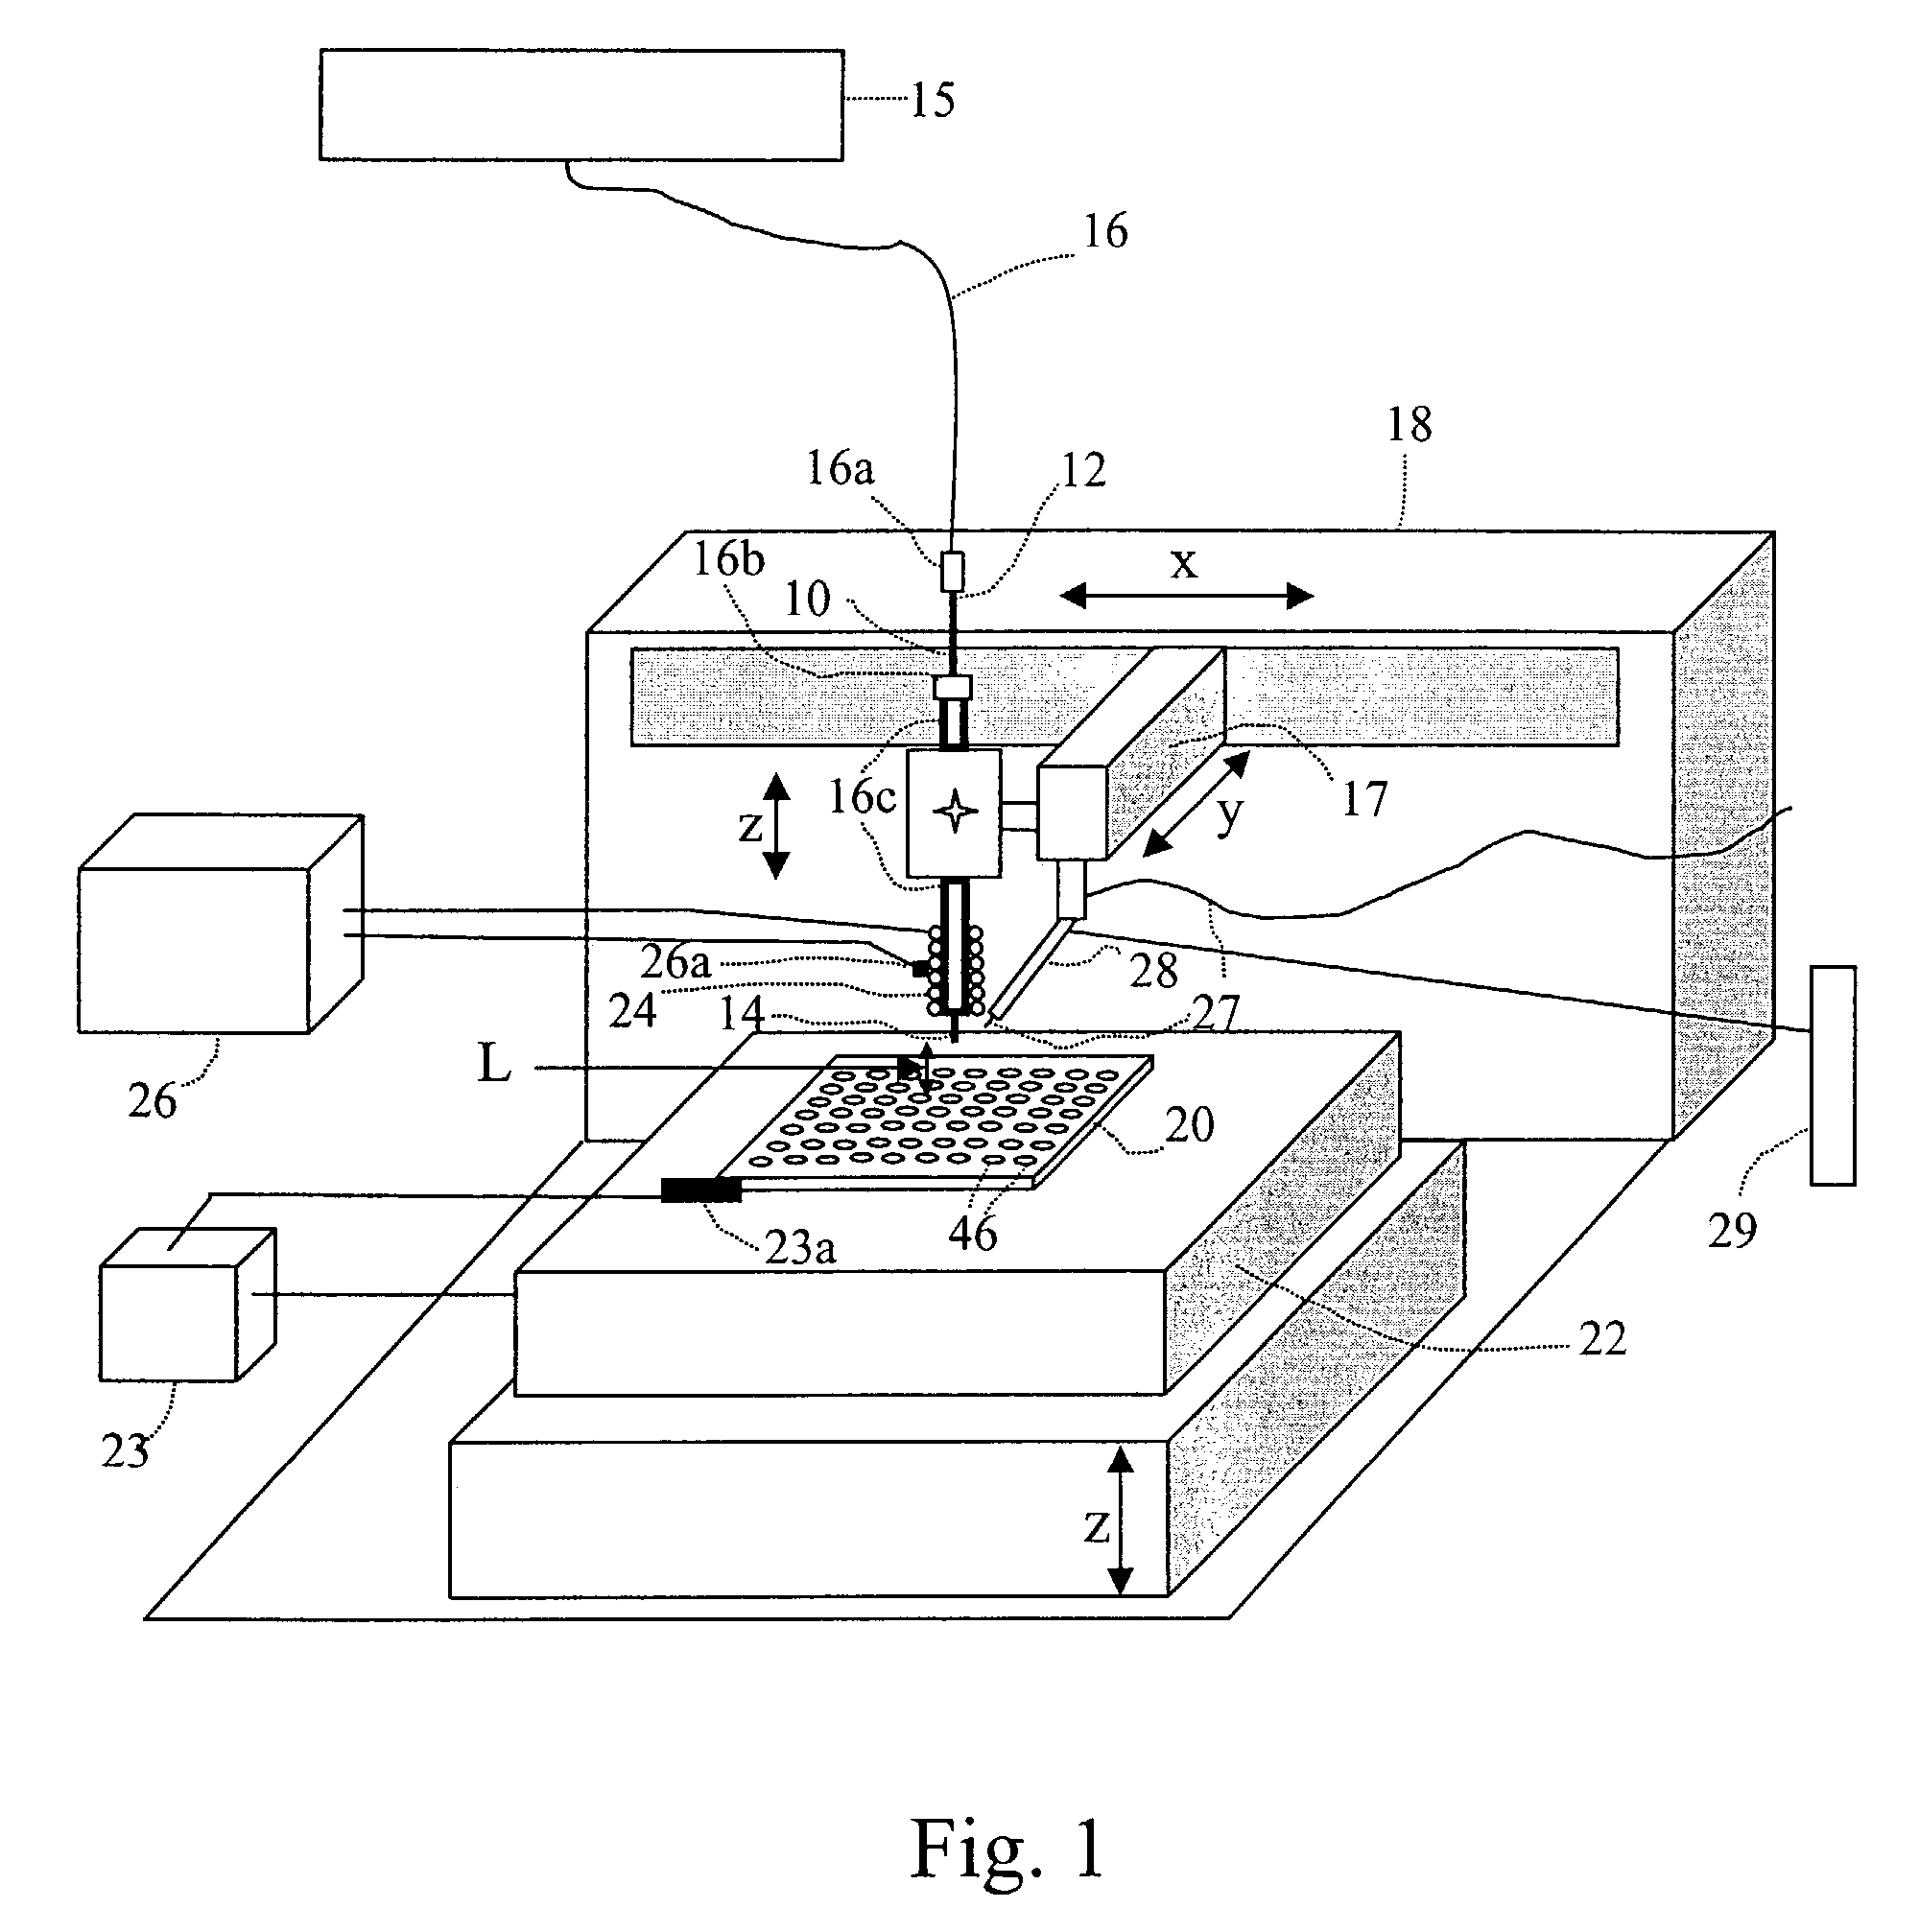 Apparatus and method for concentrating and collecting analytes from a flowing liquid stream